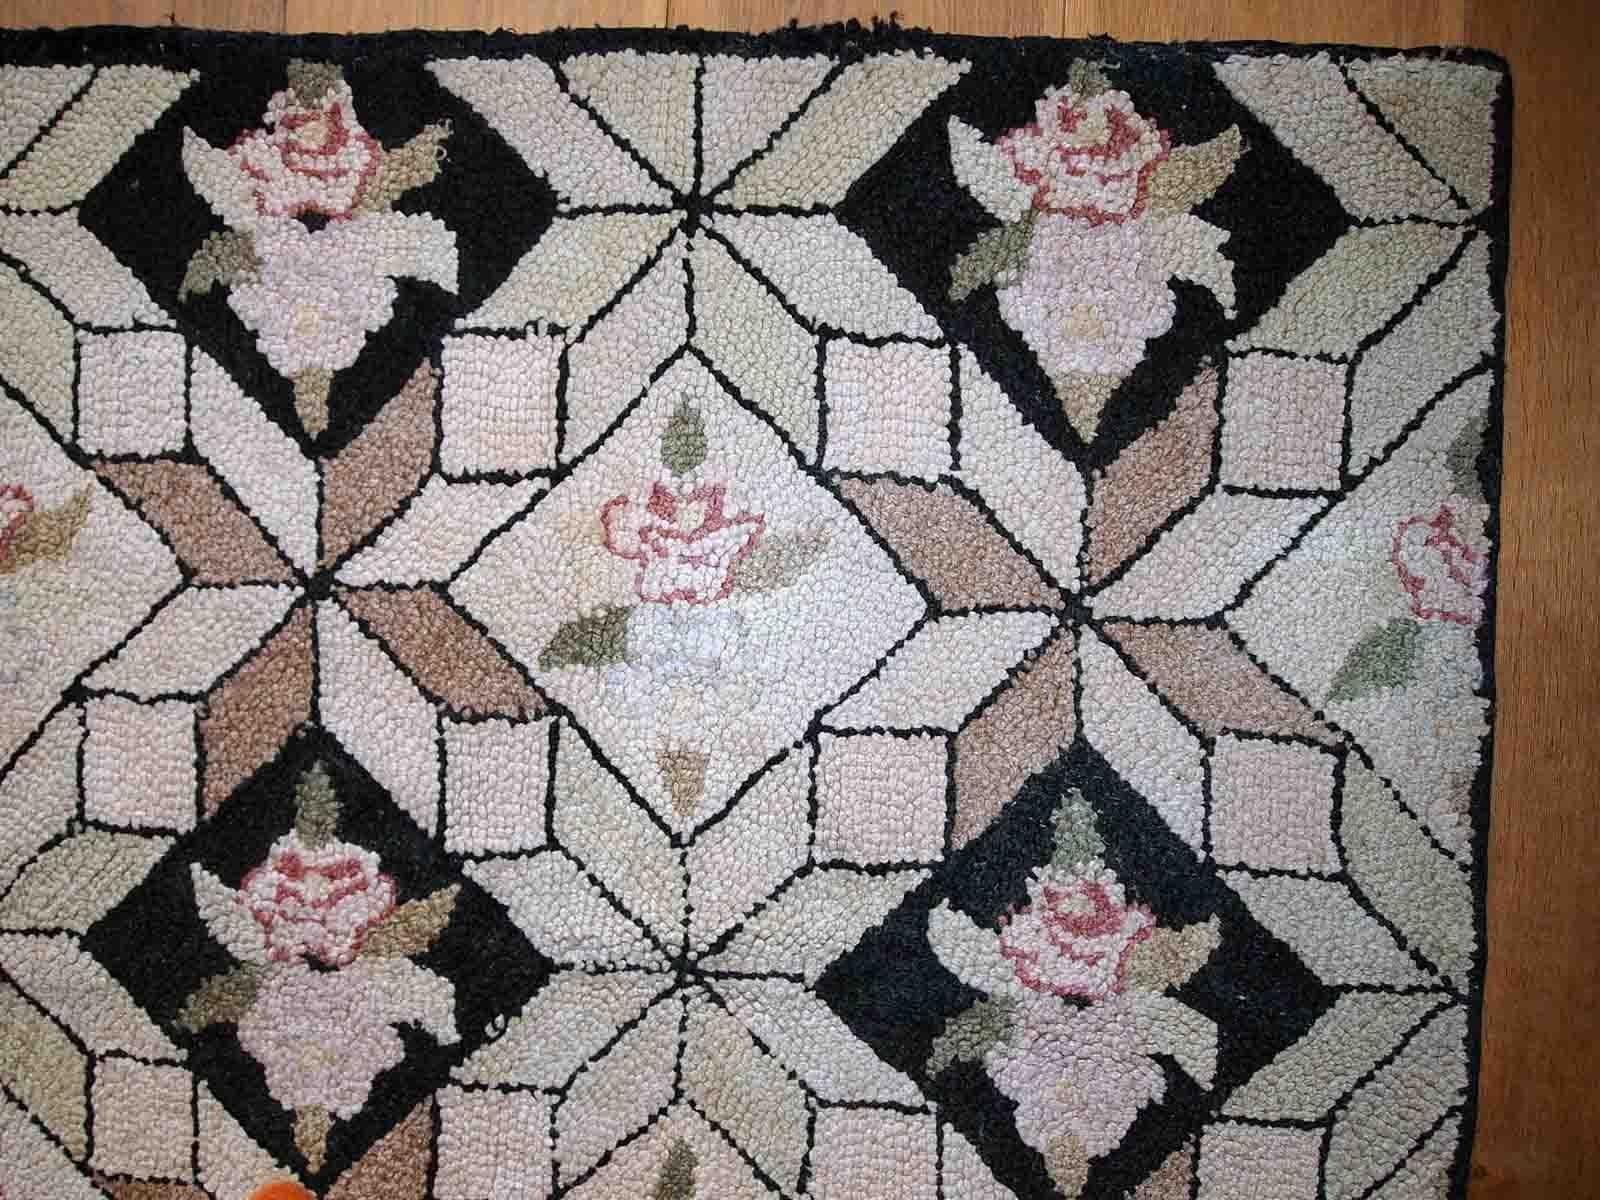 Handmade antique American hooked rug in geometric design. The rug is from the beginning of 20th century in original good condition.

-Condition: origial good, 

-circa: 1930s,

-Size: 2.9' x 4.9' (89cm x 151cm),
?
-Material: